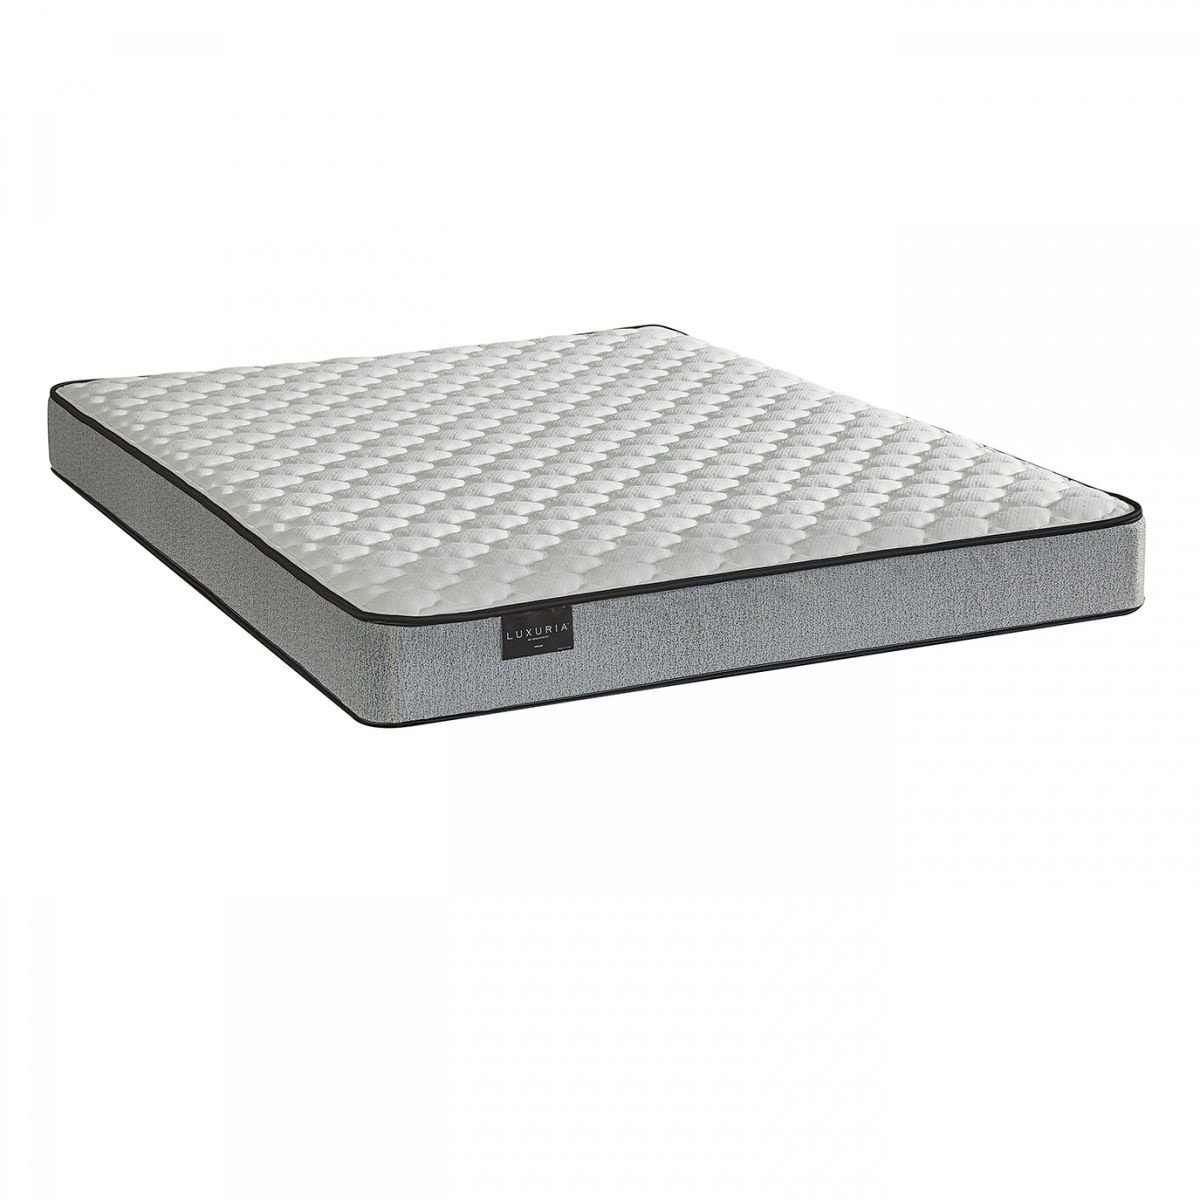 Picture of Luxuria Honor Full Firm Mattress